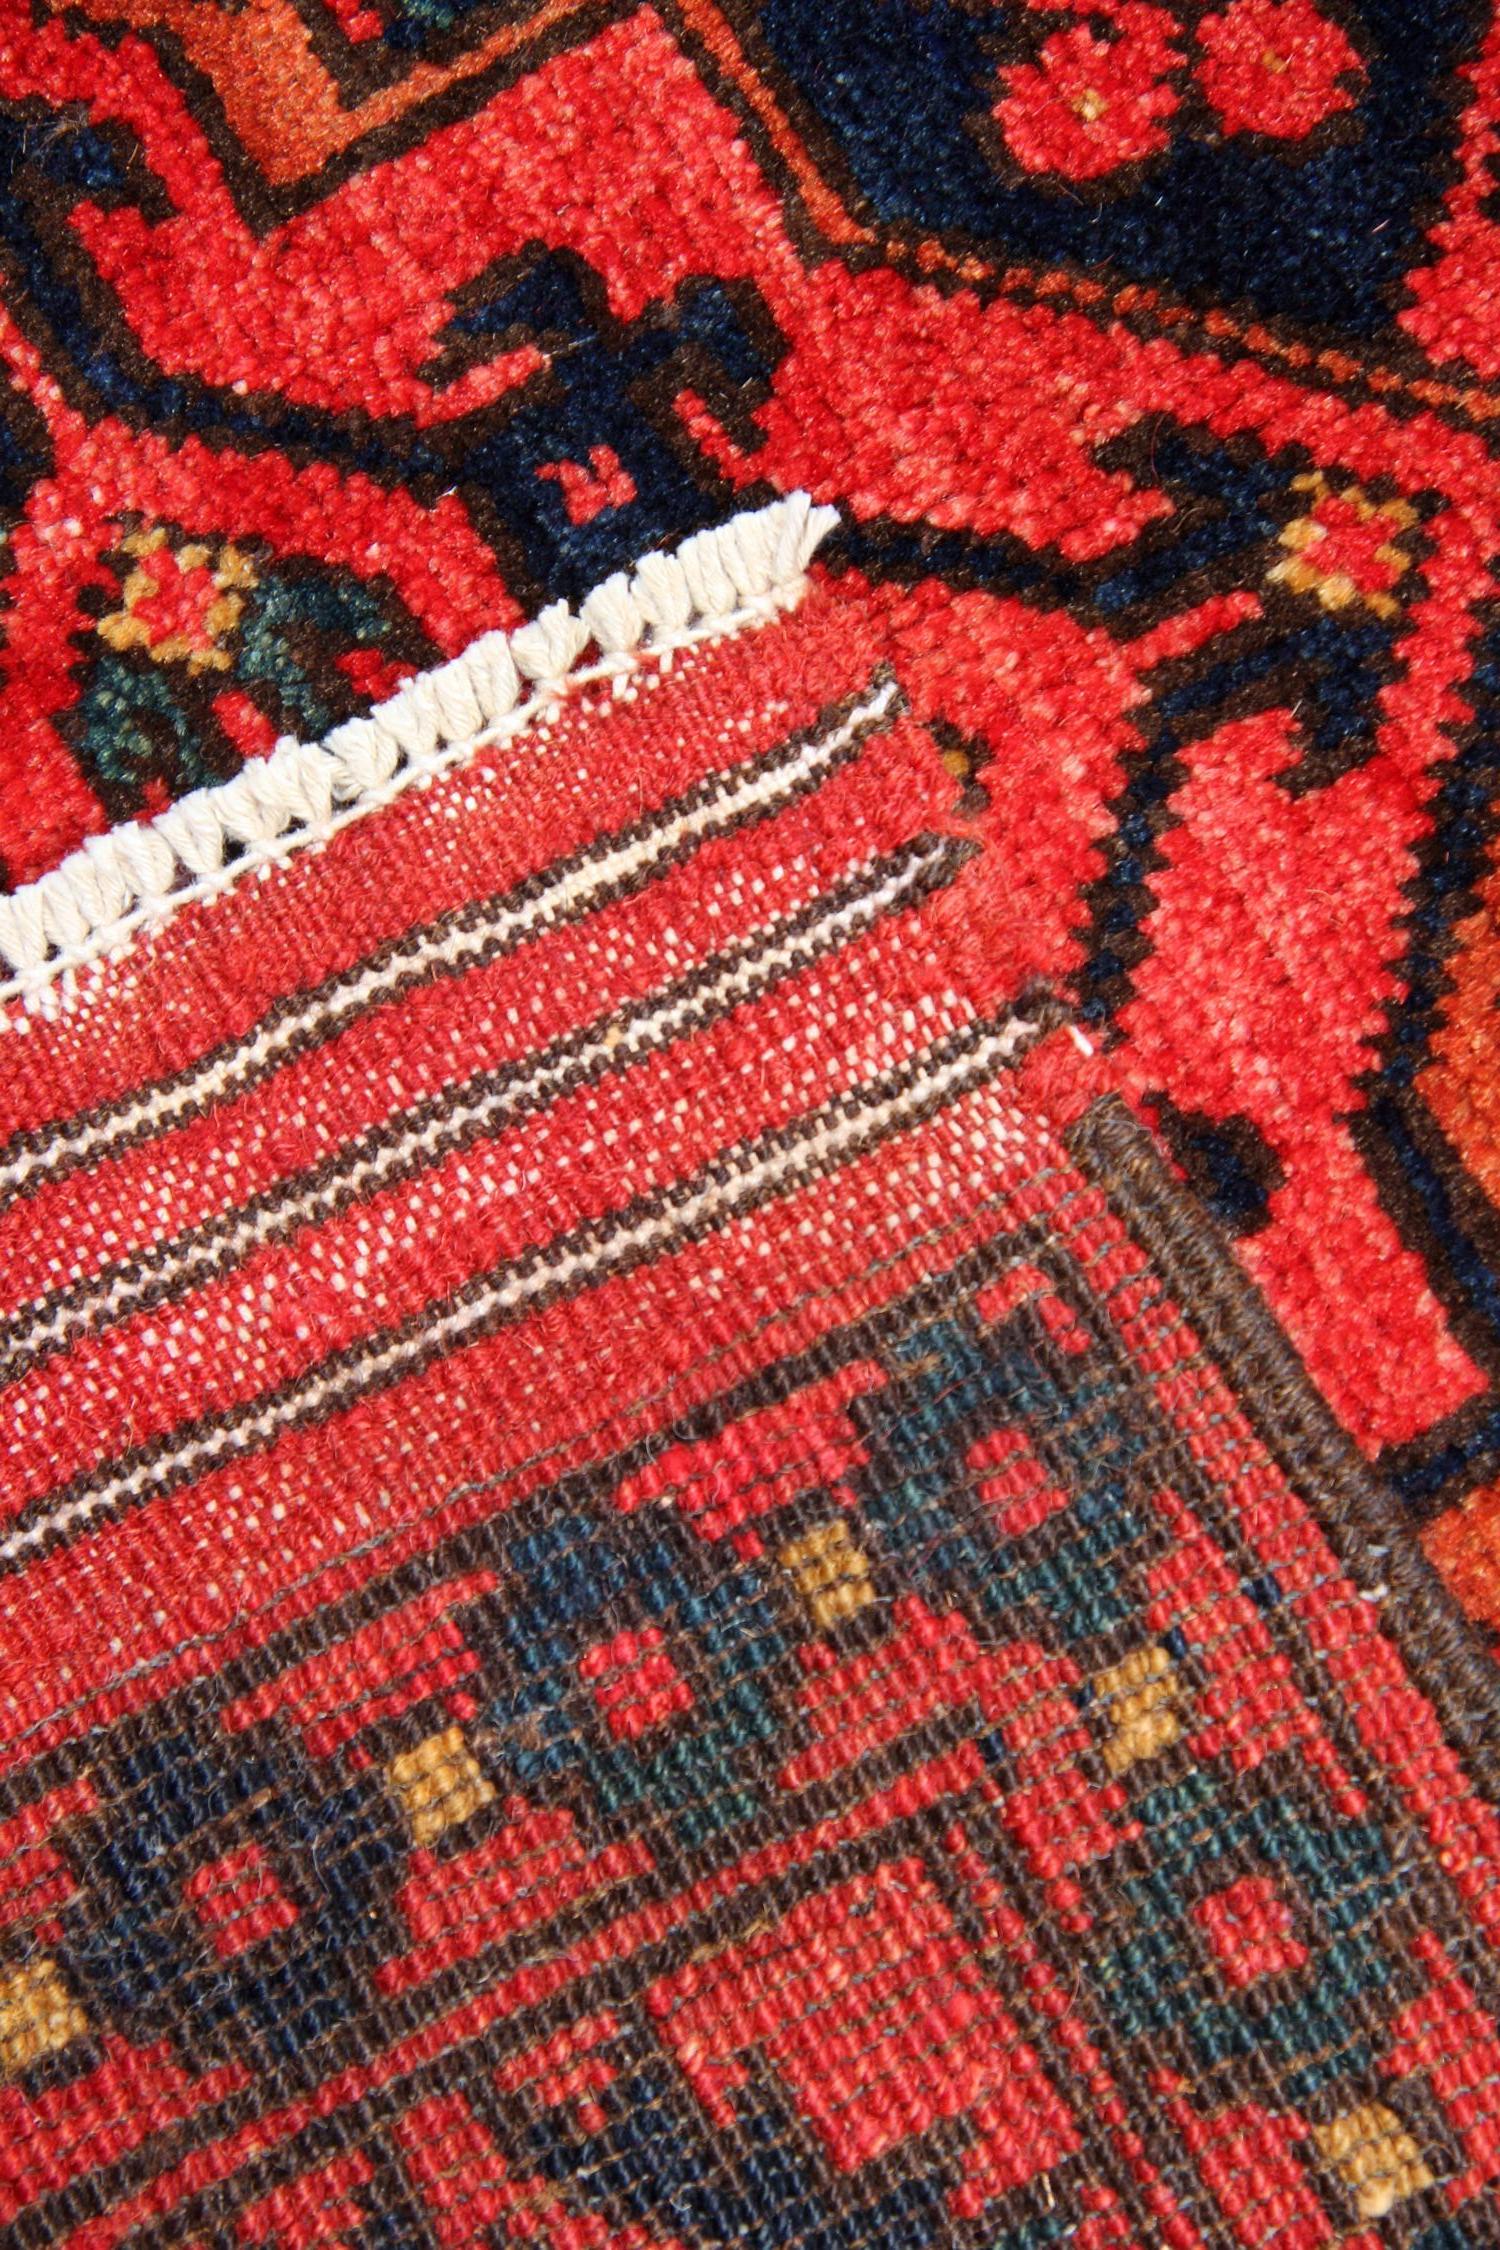 red area rugs